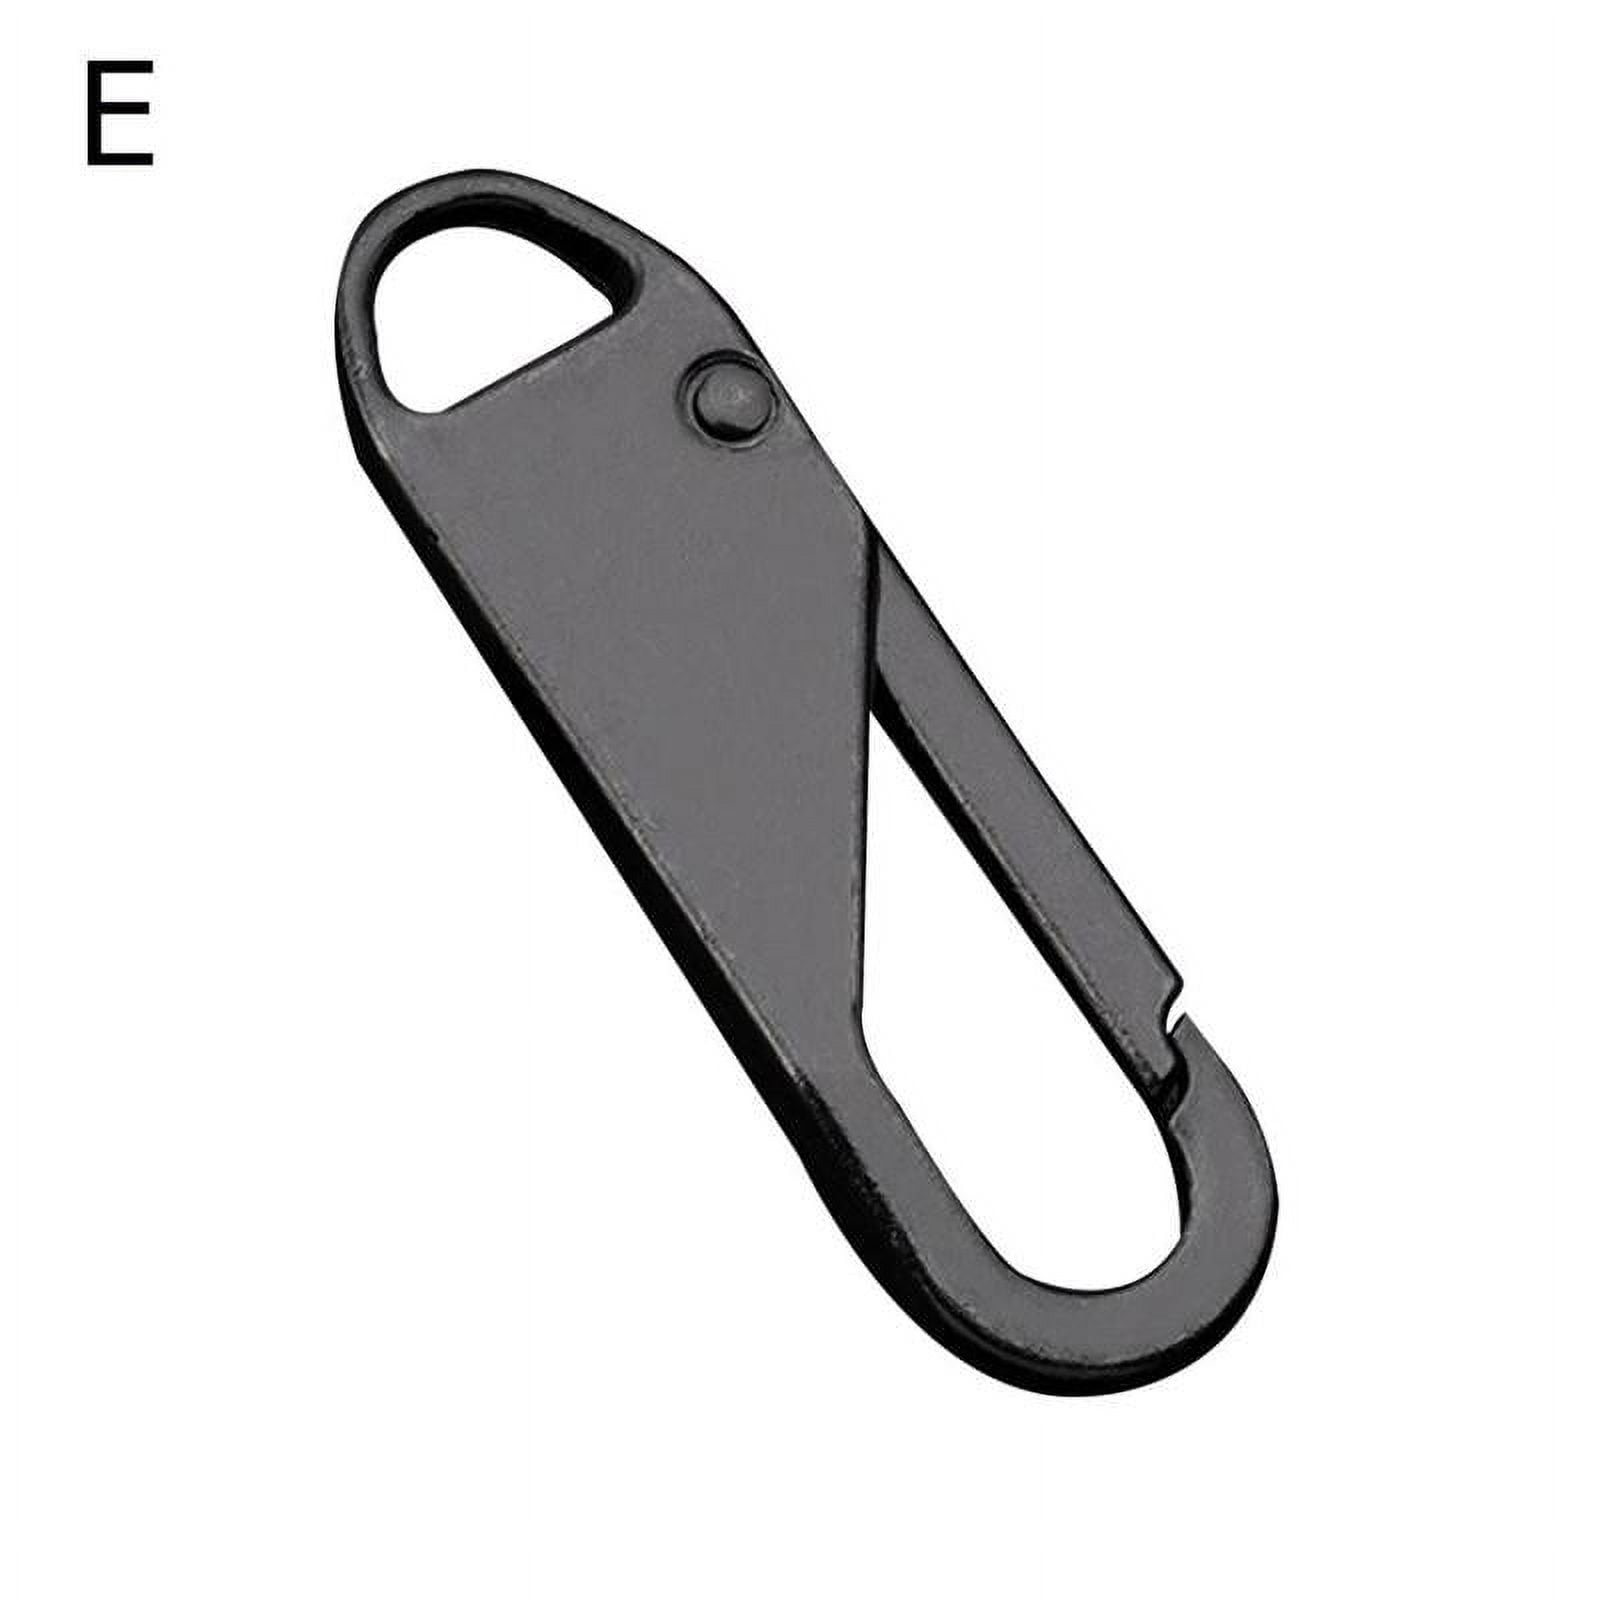 20pcs Stainless Steel Zipper Pull Locks Zipper Clips For Backpacks Anti  Theft Accessories, Dual Spring S Carabiner Zipper Clip Theft Deterrent For  Lug